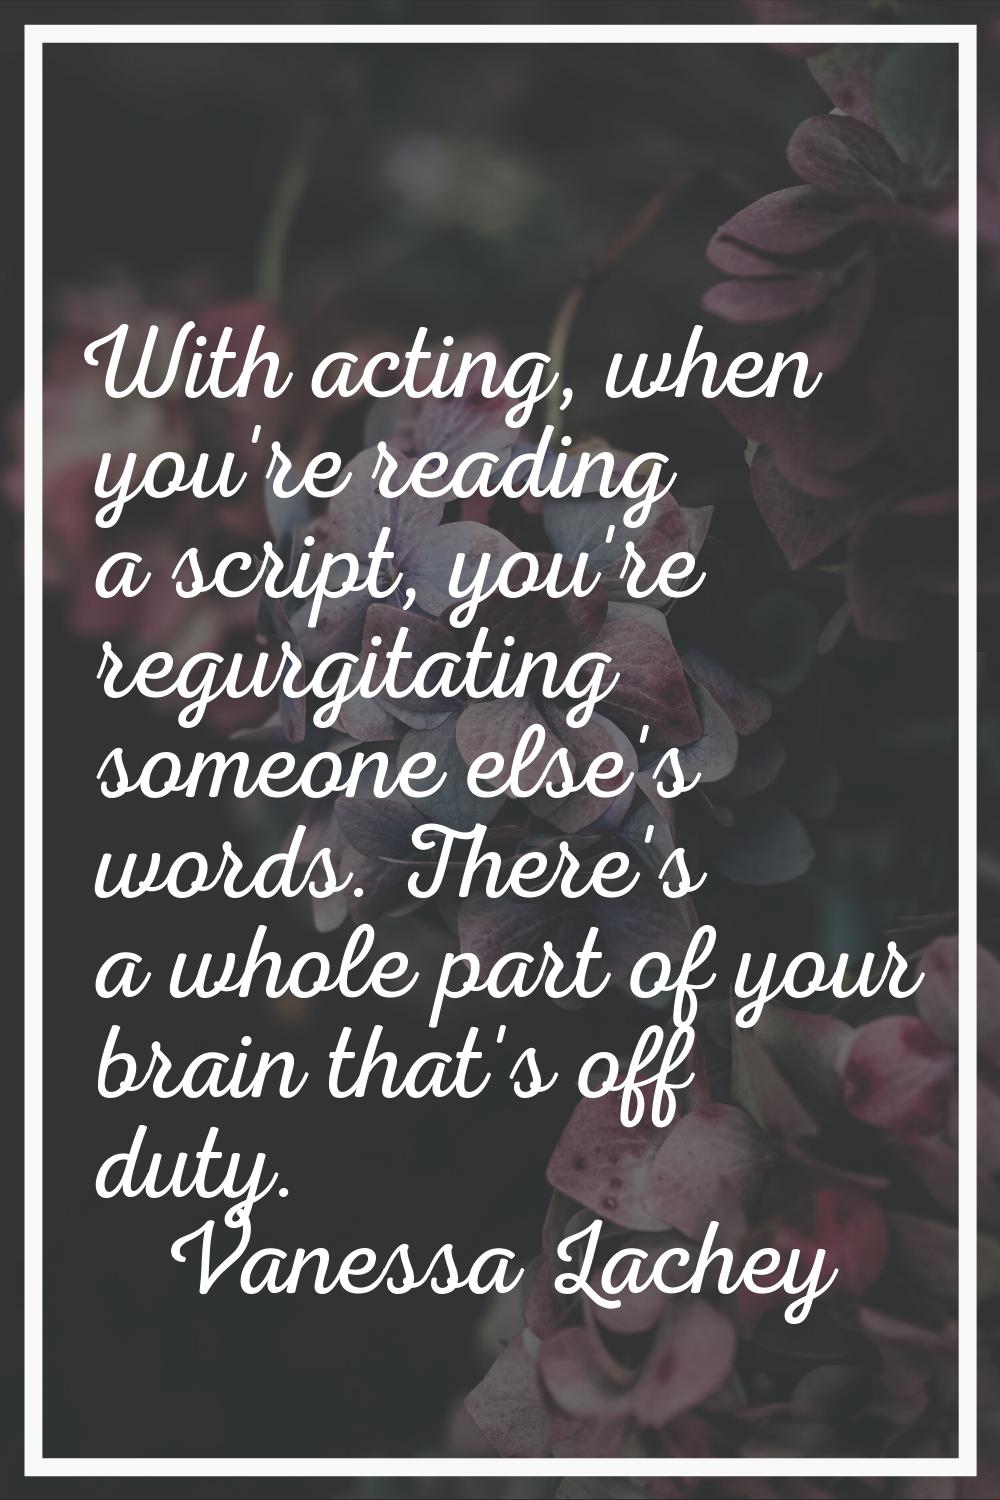 With acting, when you're reading a script, you're regurgitating someone else's words. There's a who